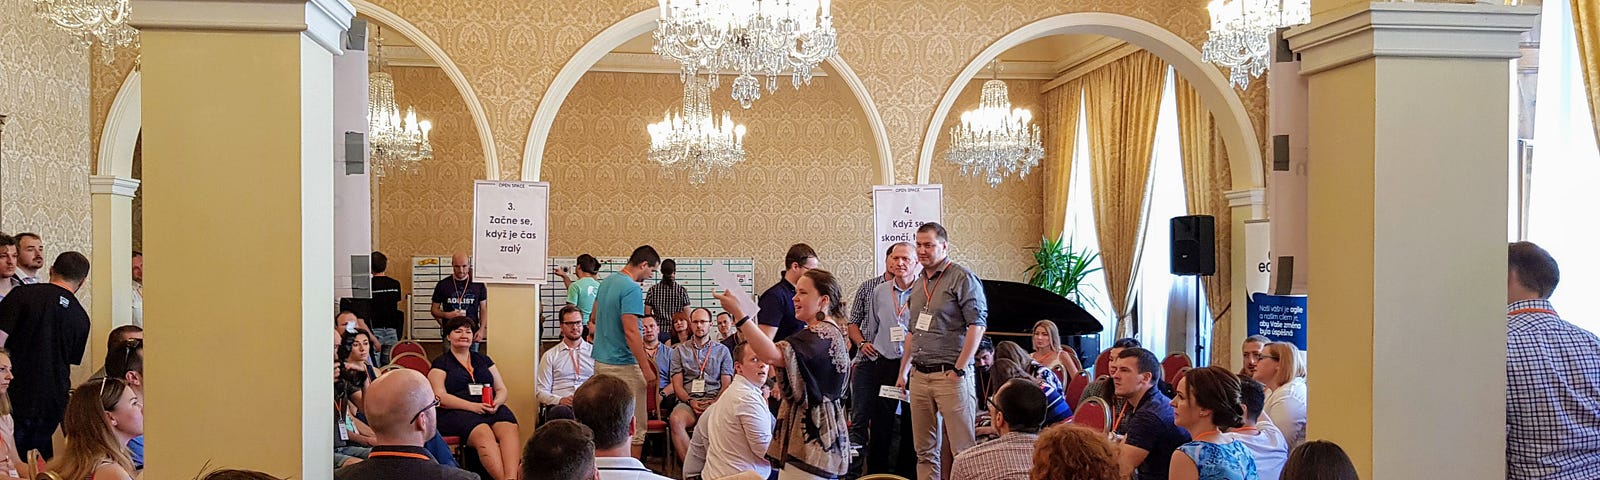 Open Space inAgile uncoference from May 2019, Prague — pitch of topics in progress